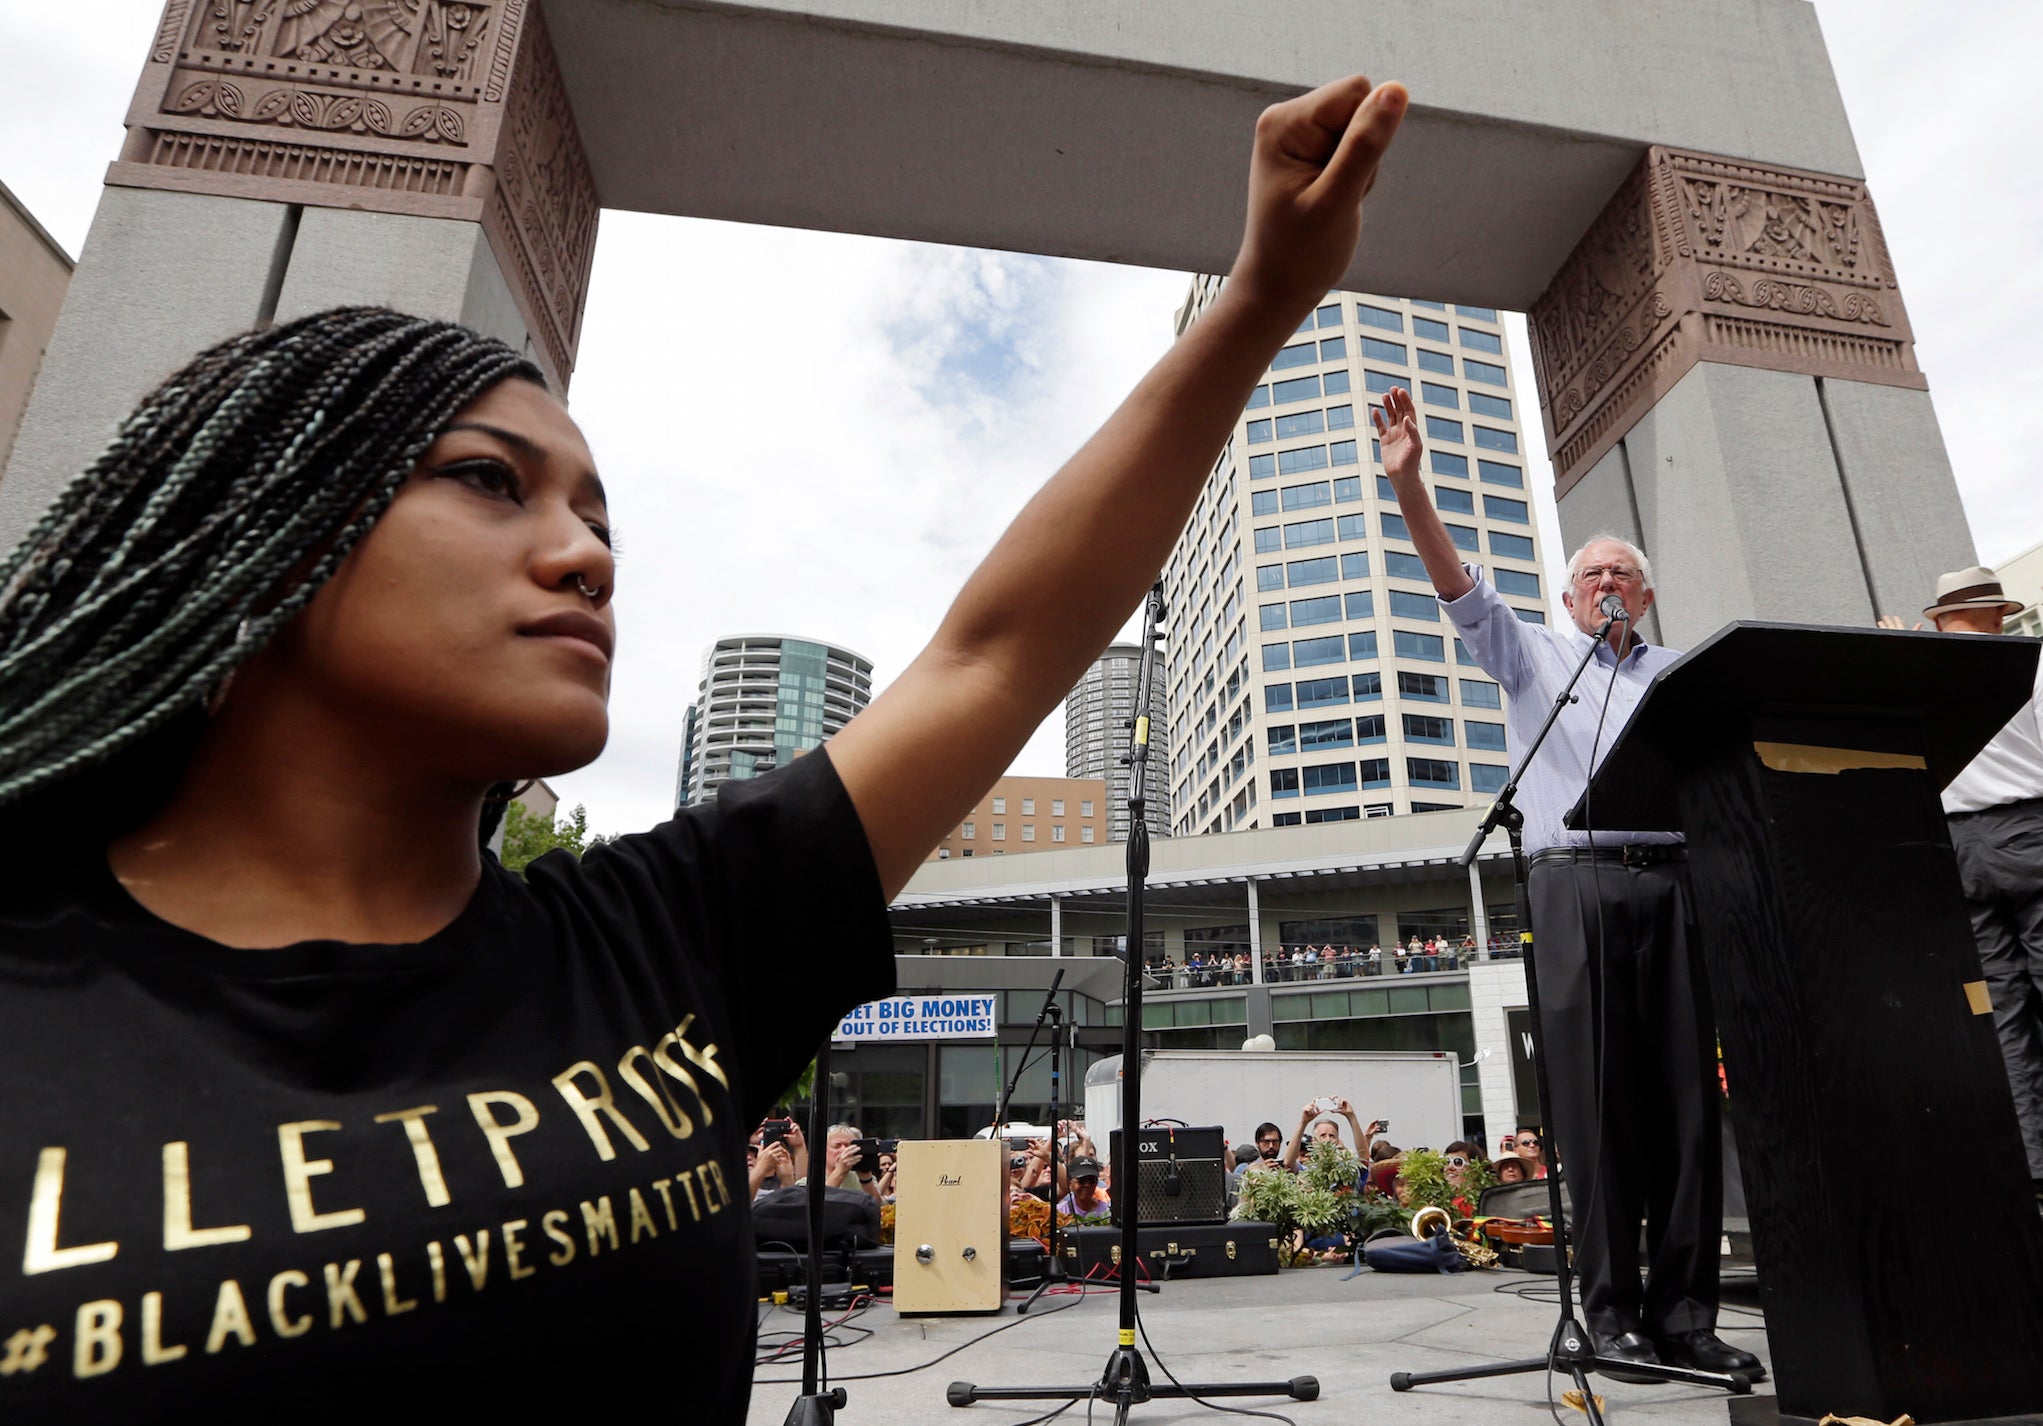 Mara Jacqueline Willaford, left, raises her fist as Bernie Sanders waves to greet the crowd before speaking at a rally on Saturday.